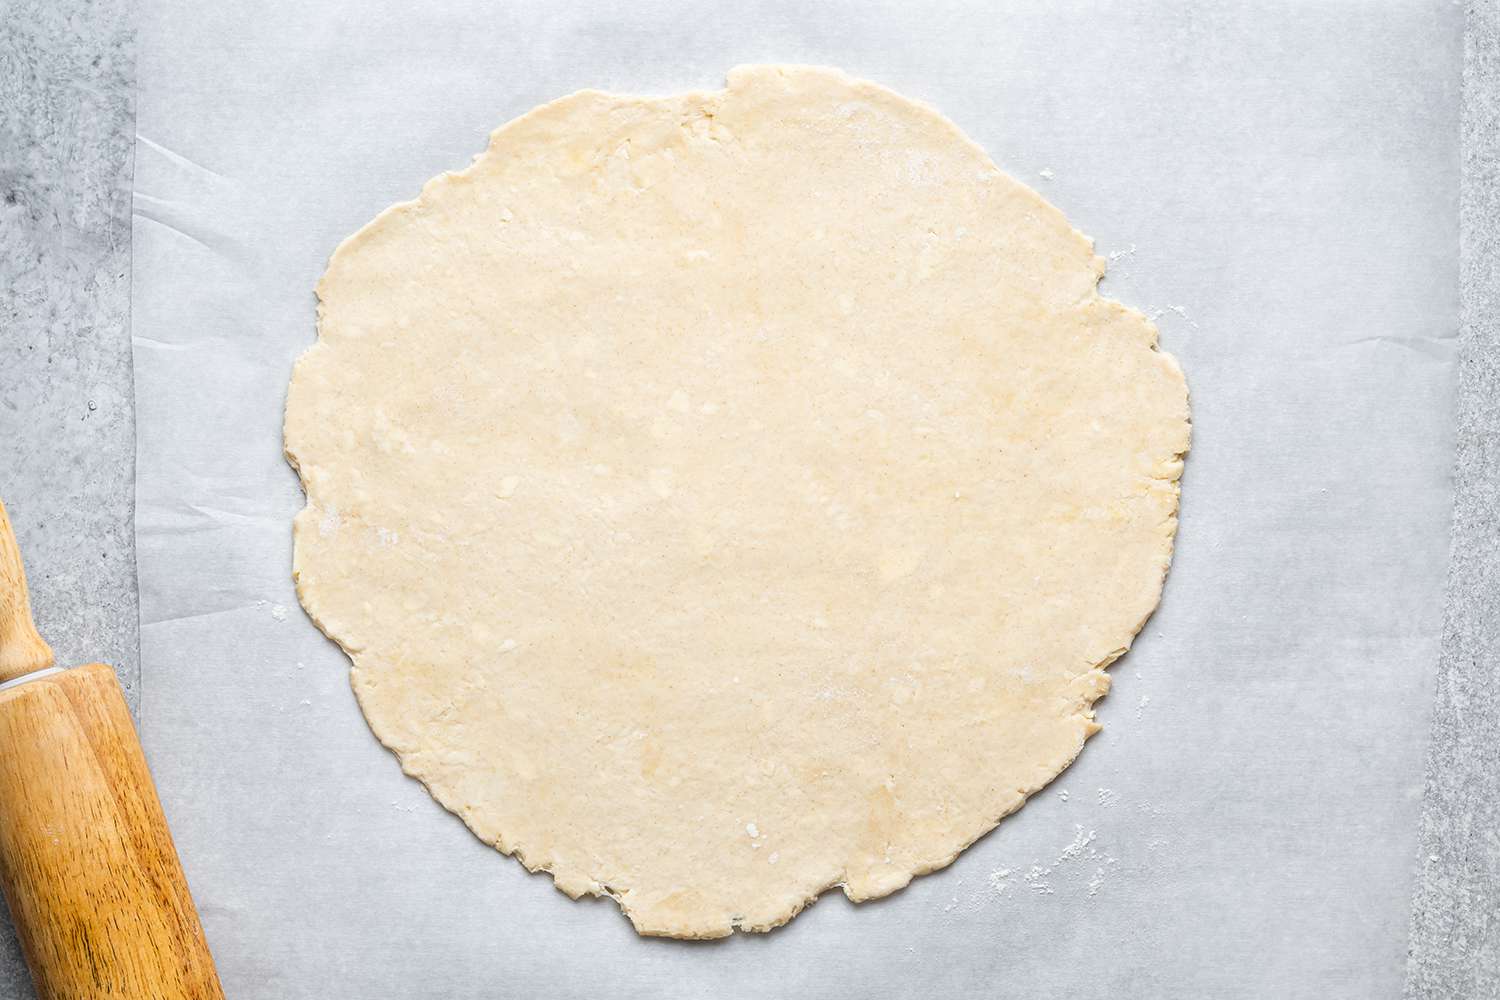 rolled out pastry dough